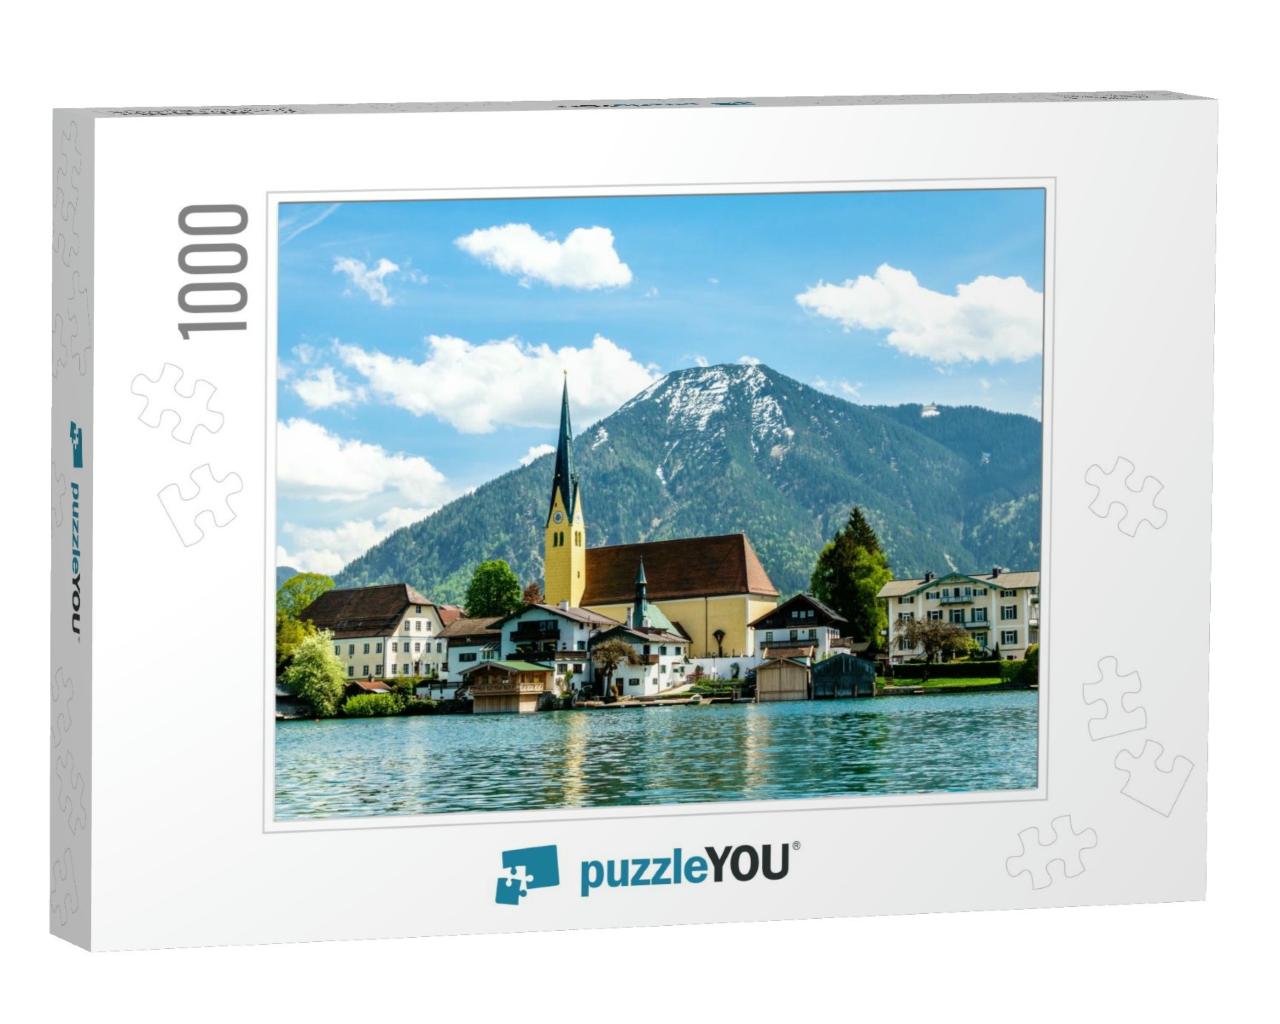 Tegernsee Lake in Bavaria - Germany - Photo... Jigsaw Puzzle with 1000 pieces